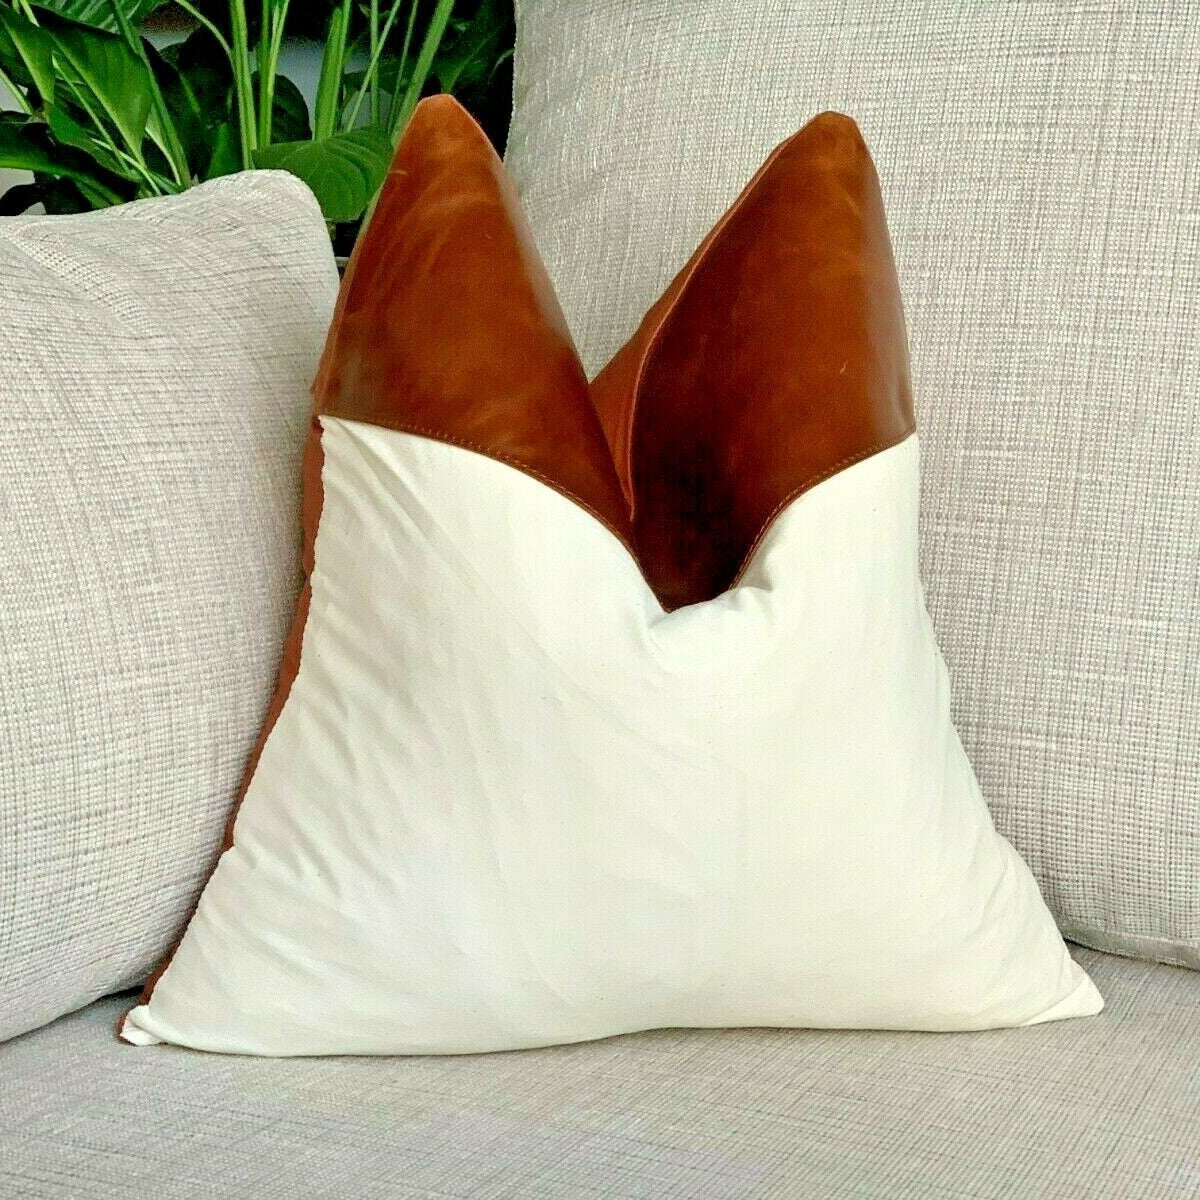 Melbourne Leather Co Genuine Leather Cushion Cover Pillow Cover Leather Pillow Leather Cushion Vintage Leather Tan Pillow Cover